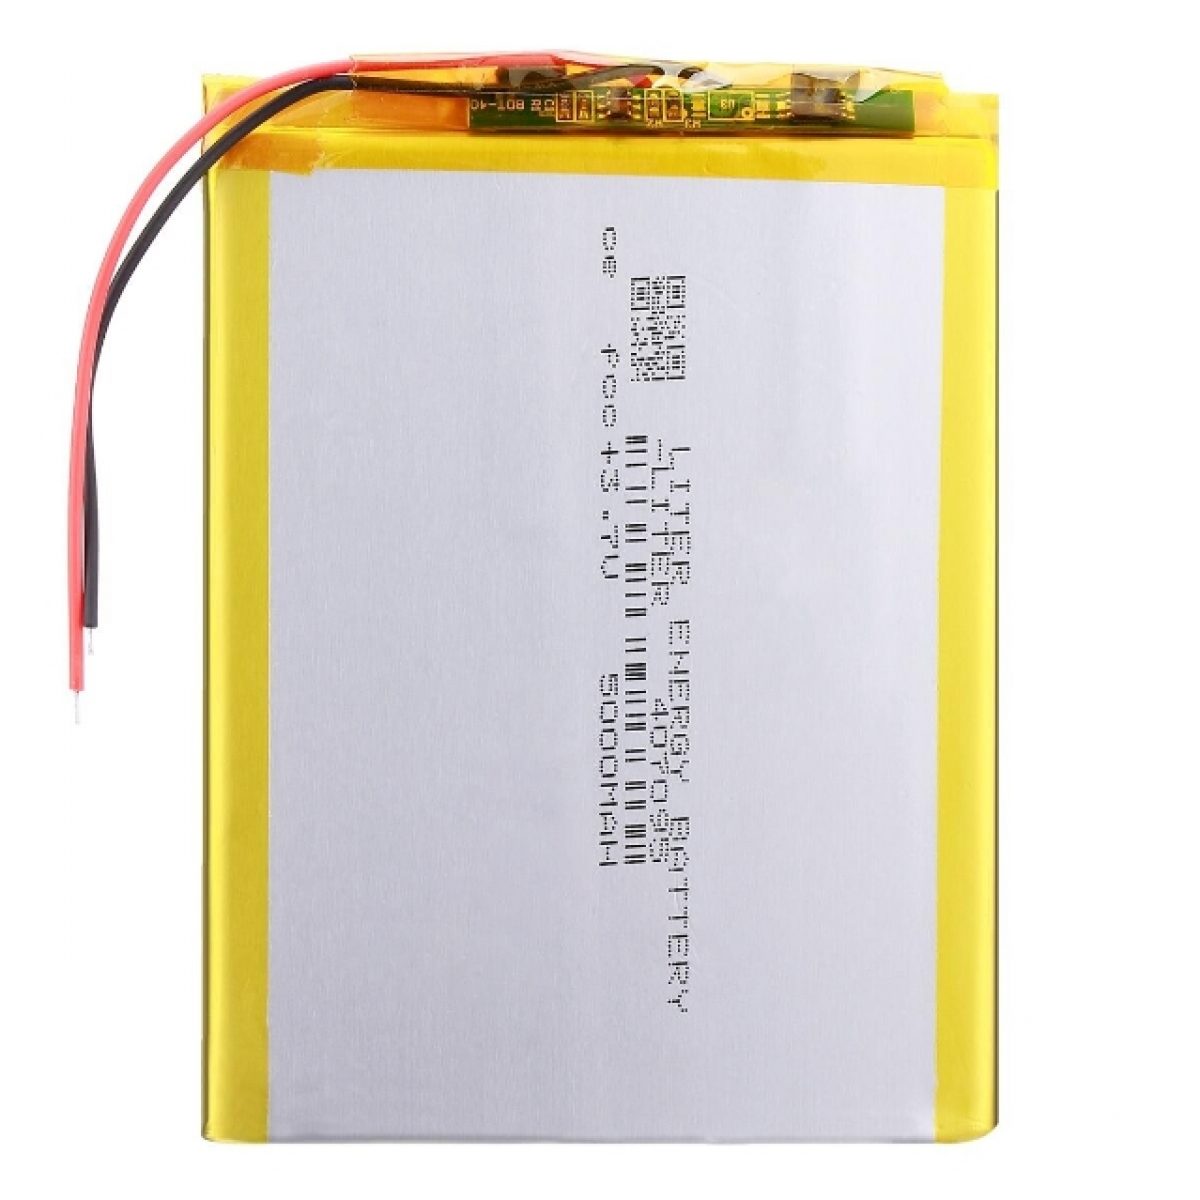 2PCS 3.7V 500mAh Lithium Battery 14500 with USB Charger for E35